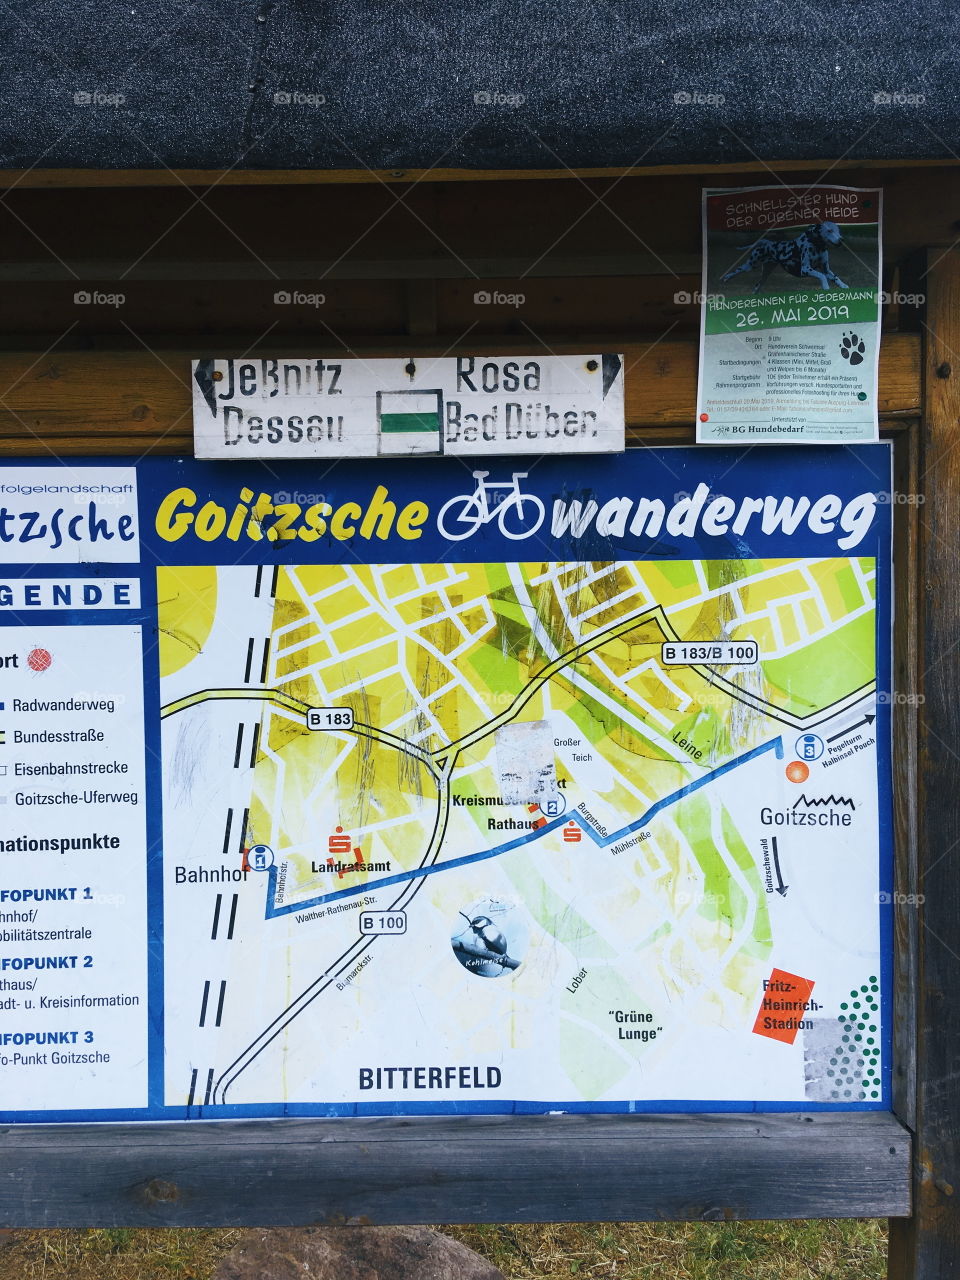 Bike route by the Goitzschesee